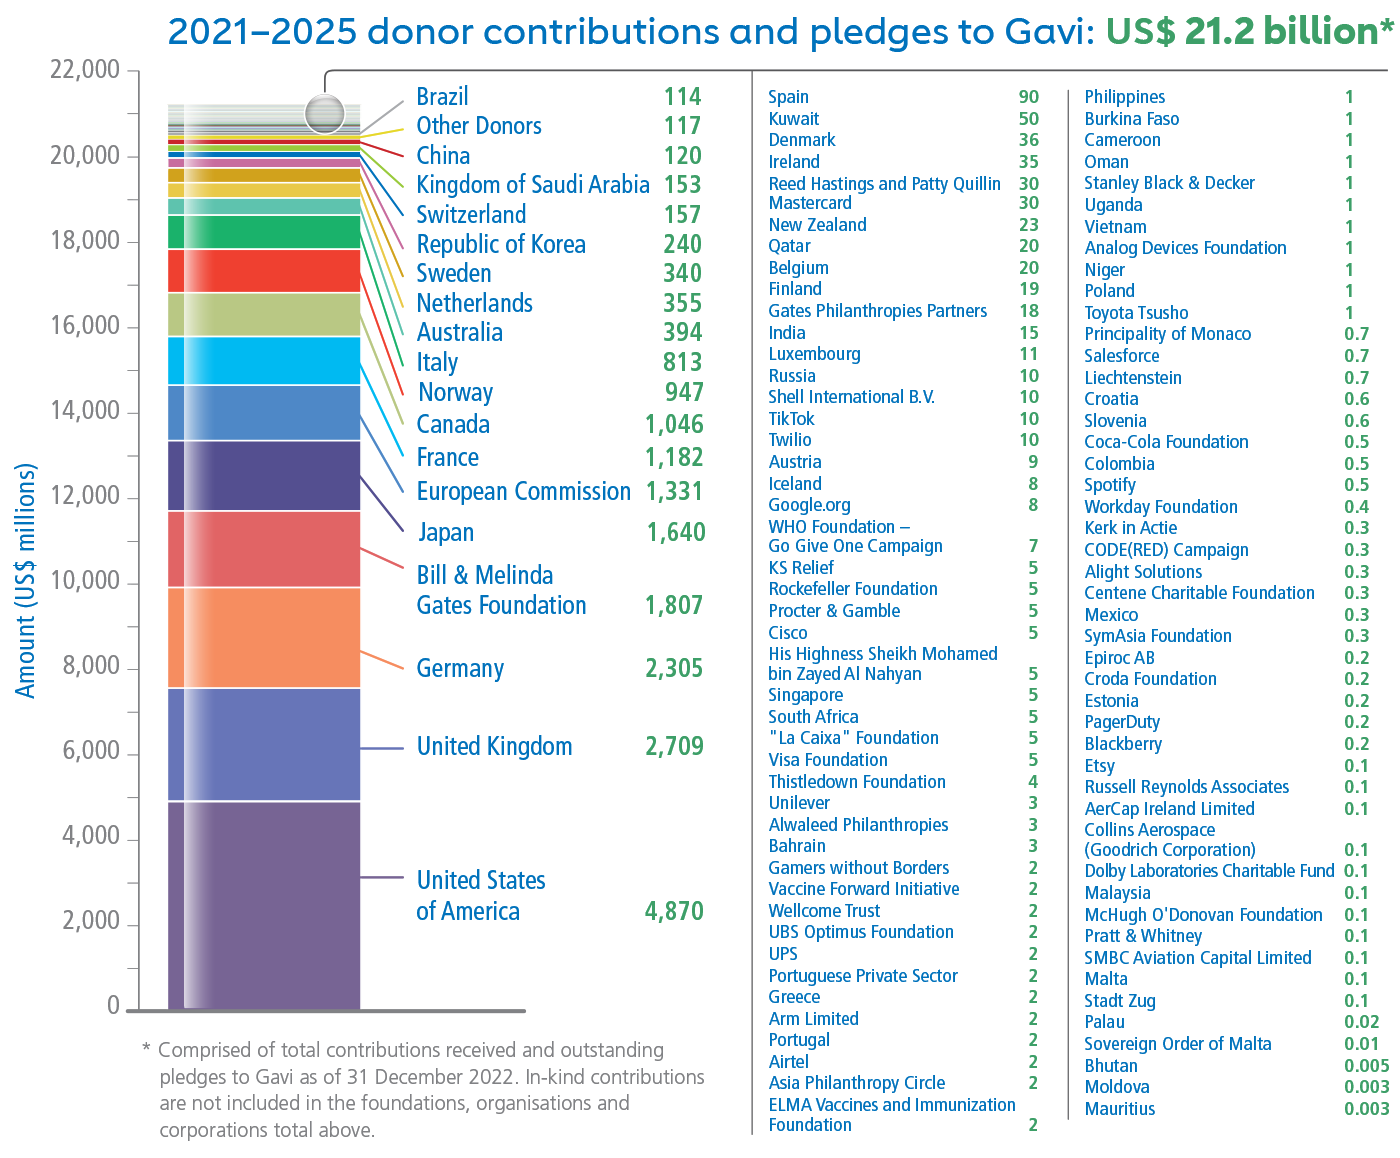 Donor contributions: 2021-2025